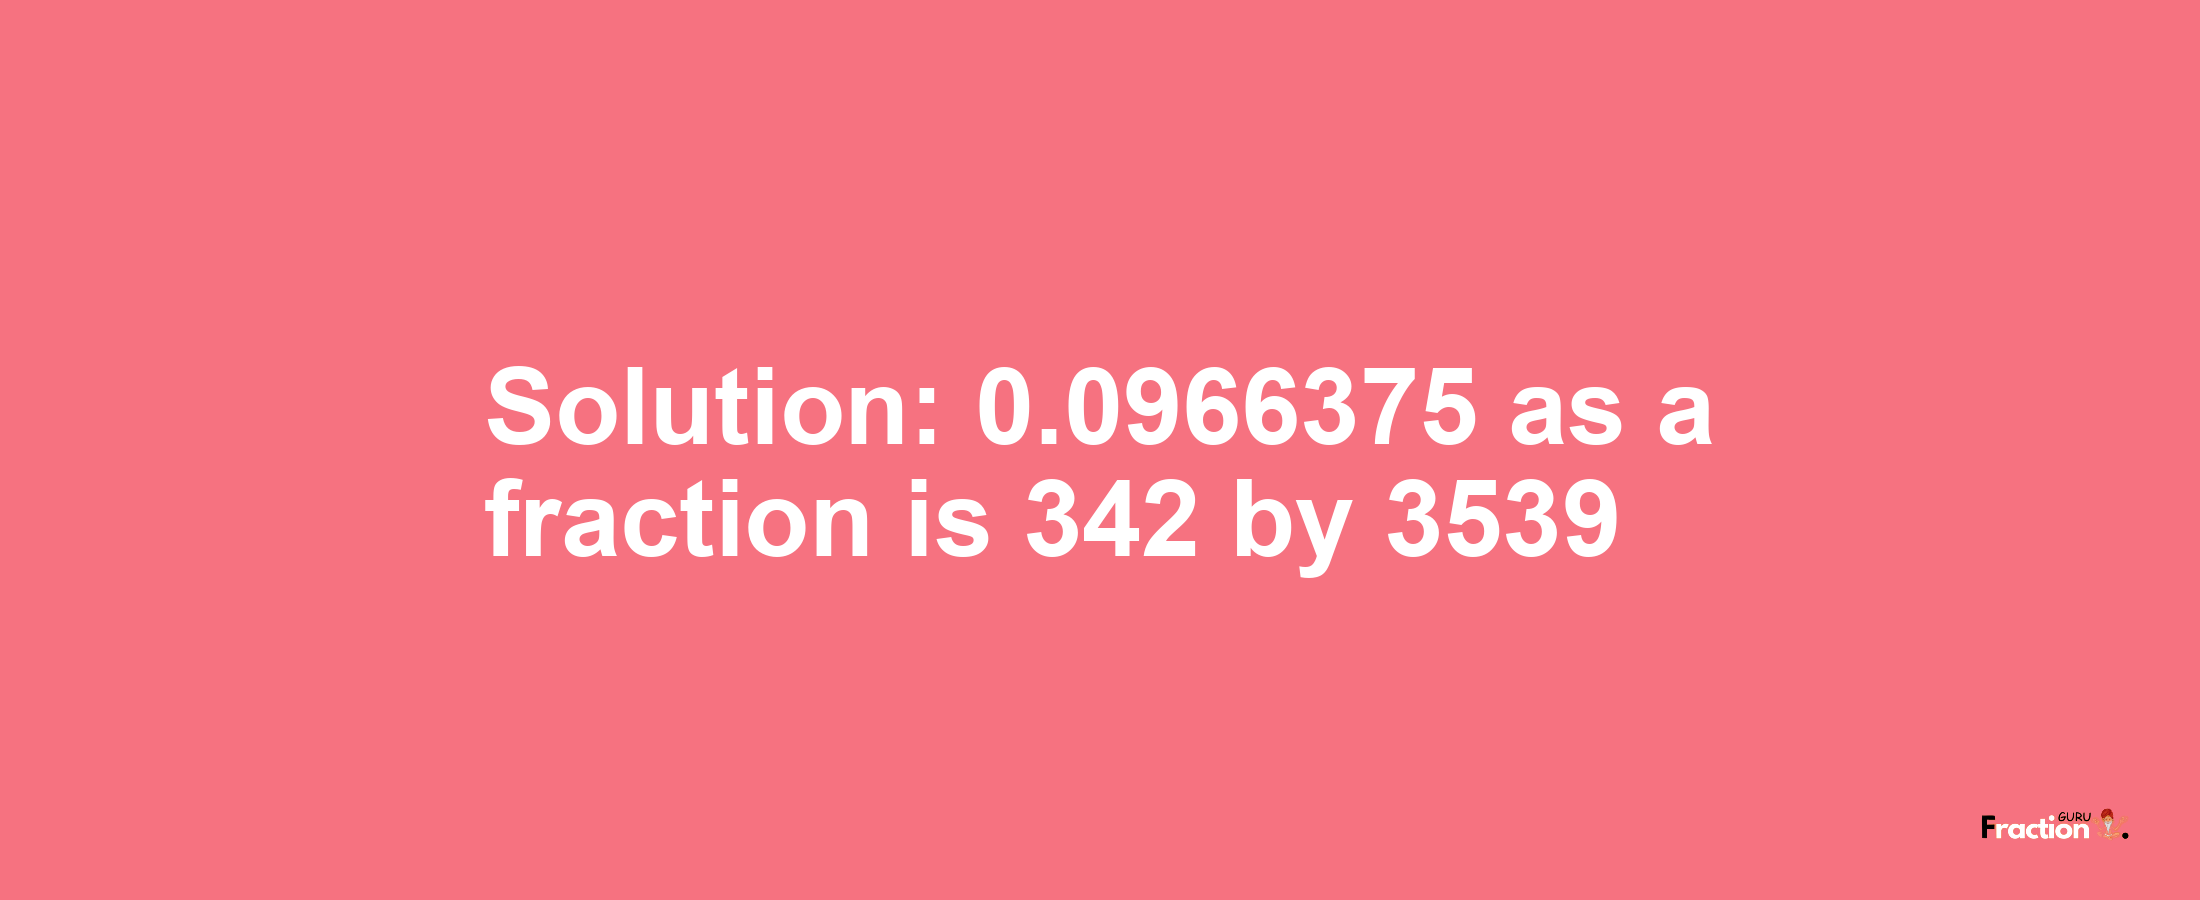 Solution:0.0966375 as a fraction is 342/3539